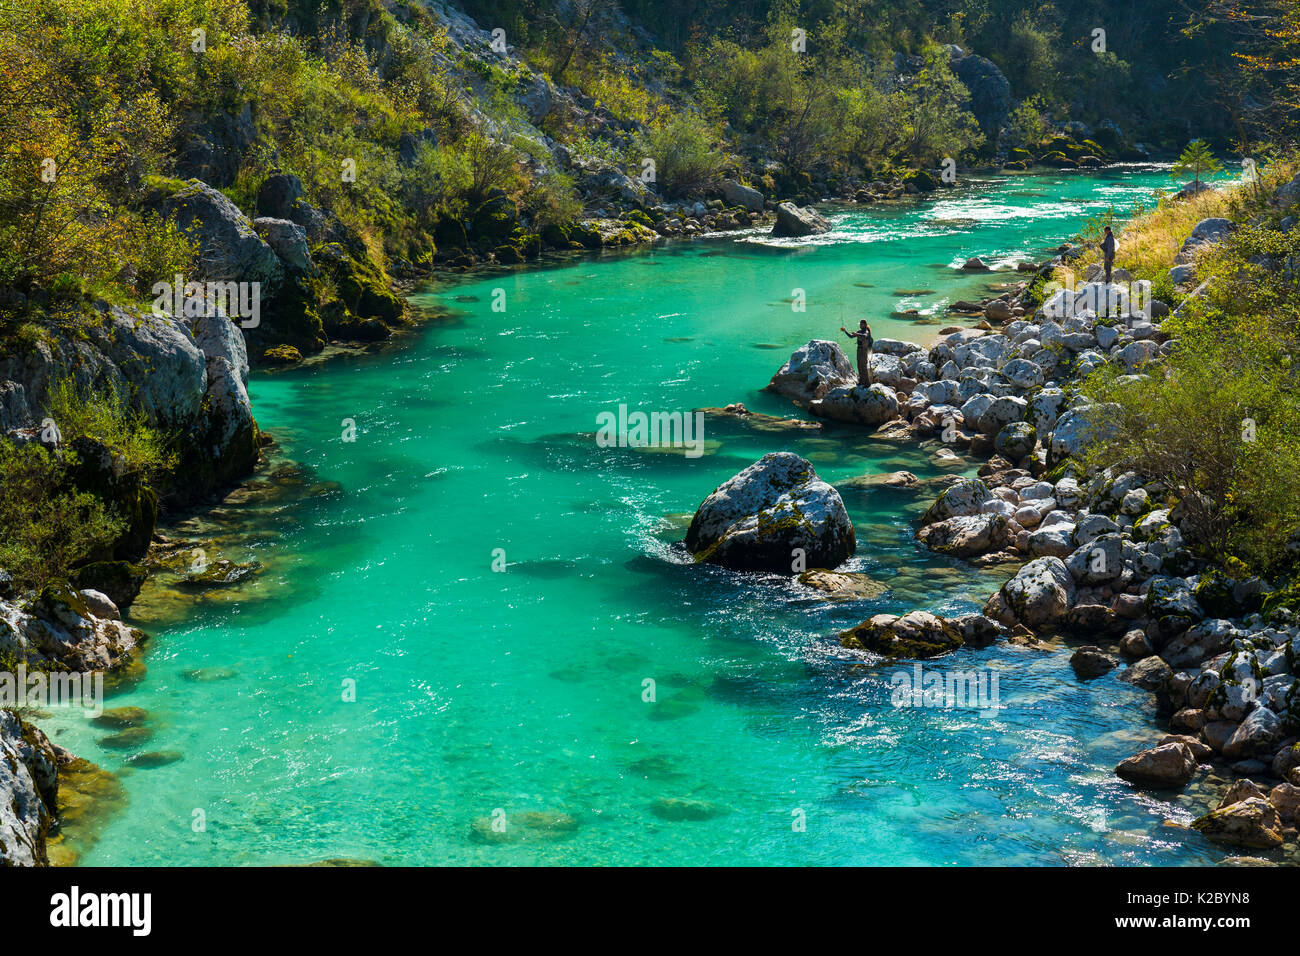 Clear blue waters of the Soca river, Soca Valley, Julian Alps, Slovenia, October 2014. Stock Photo